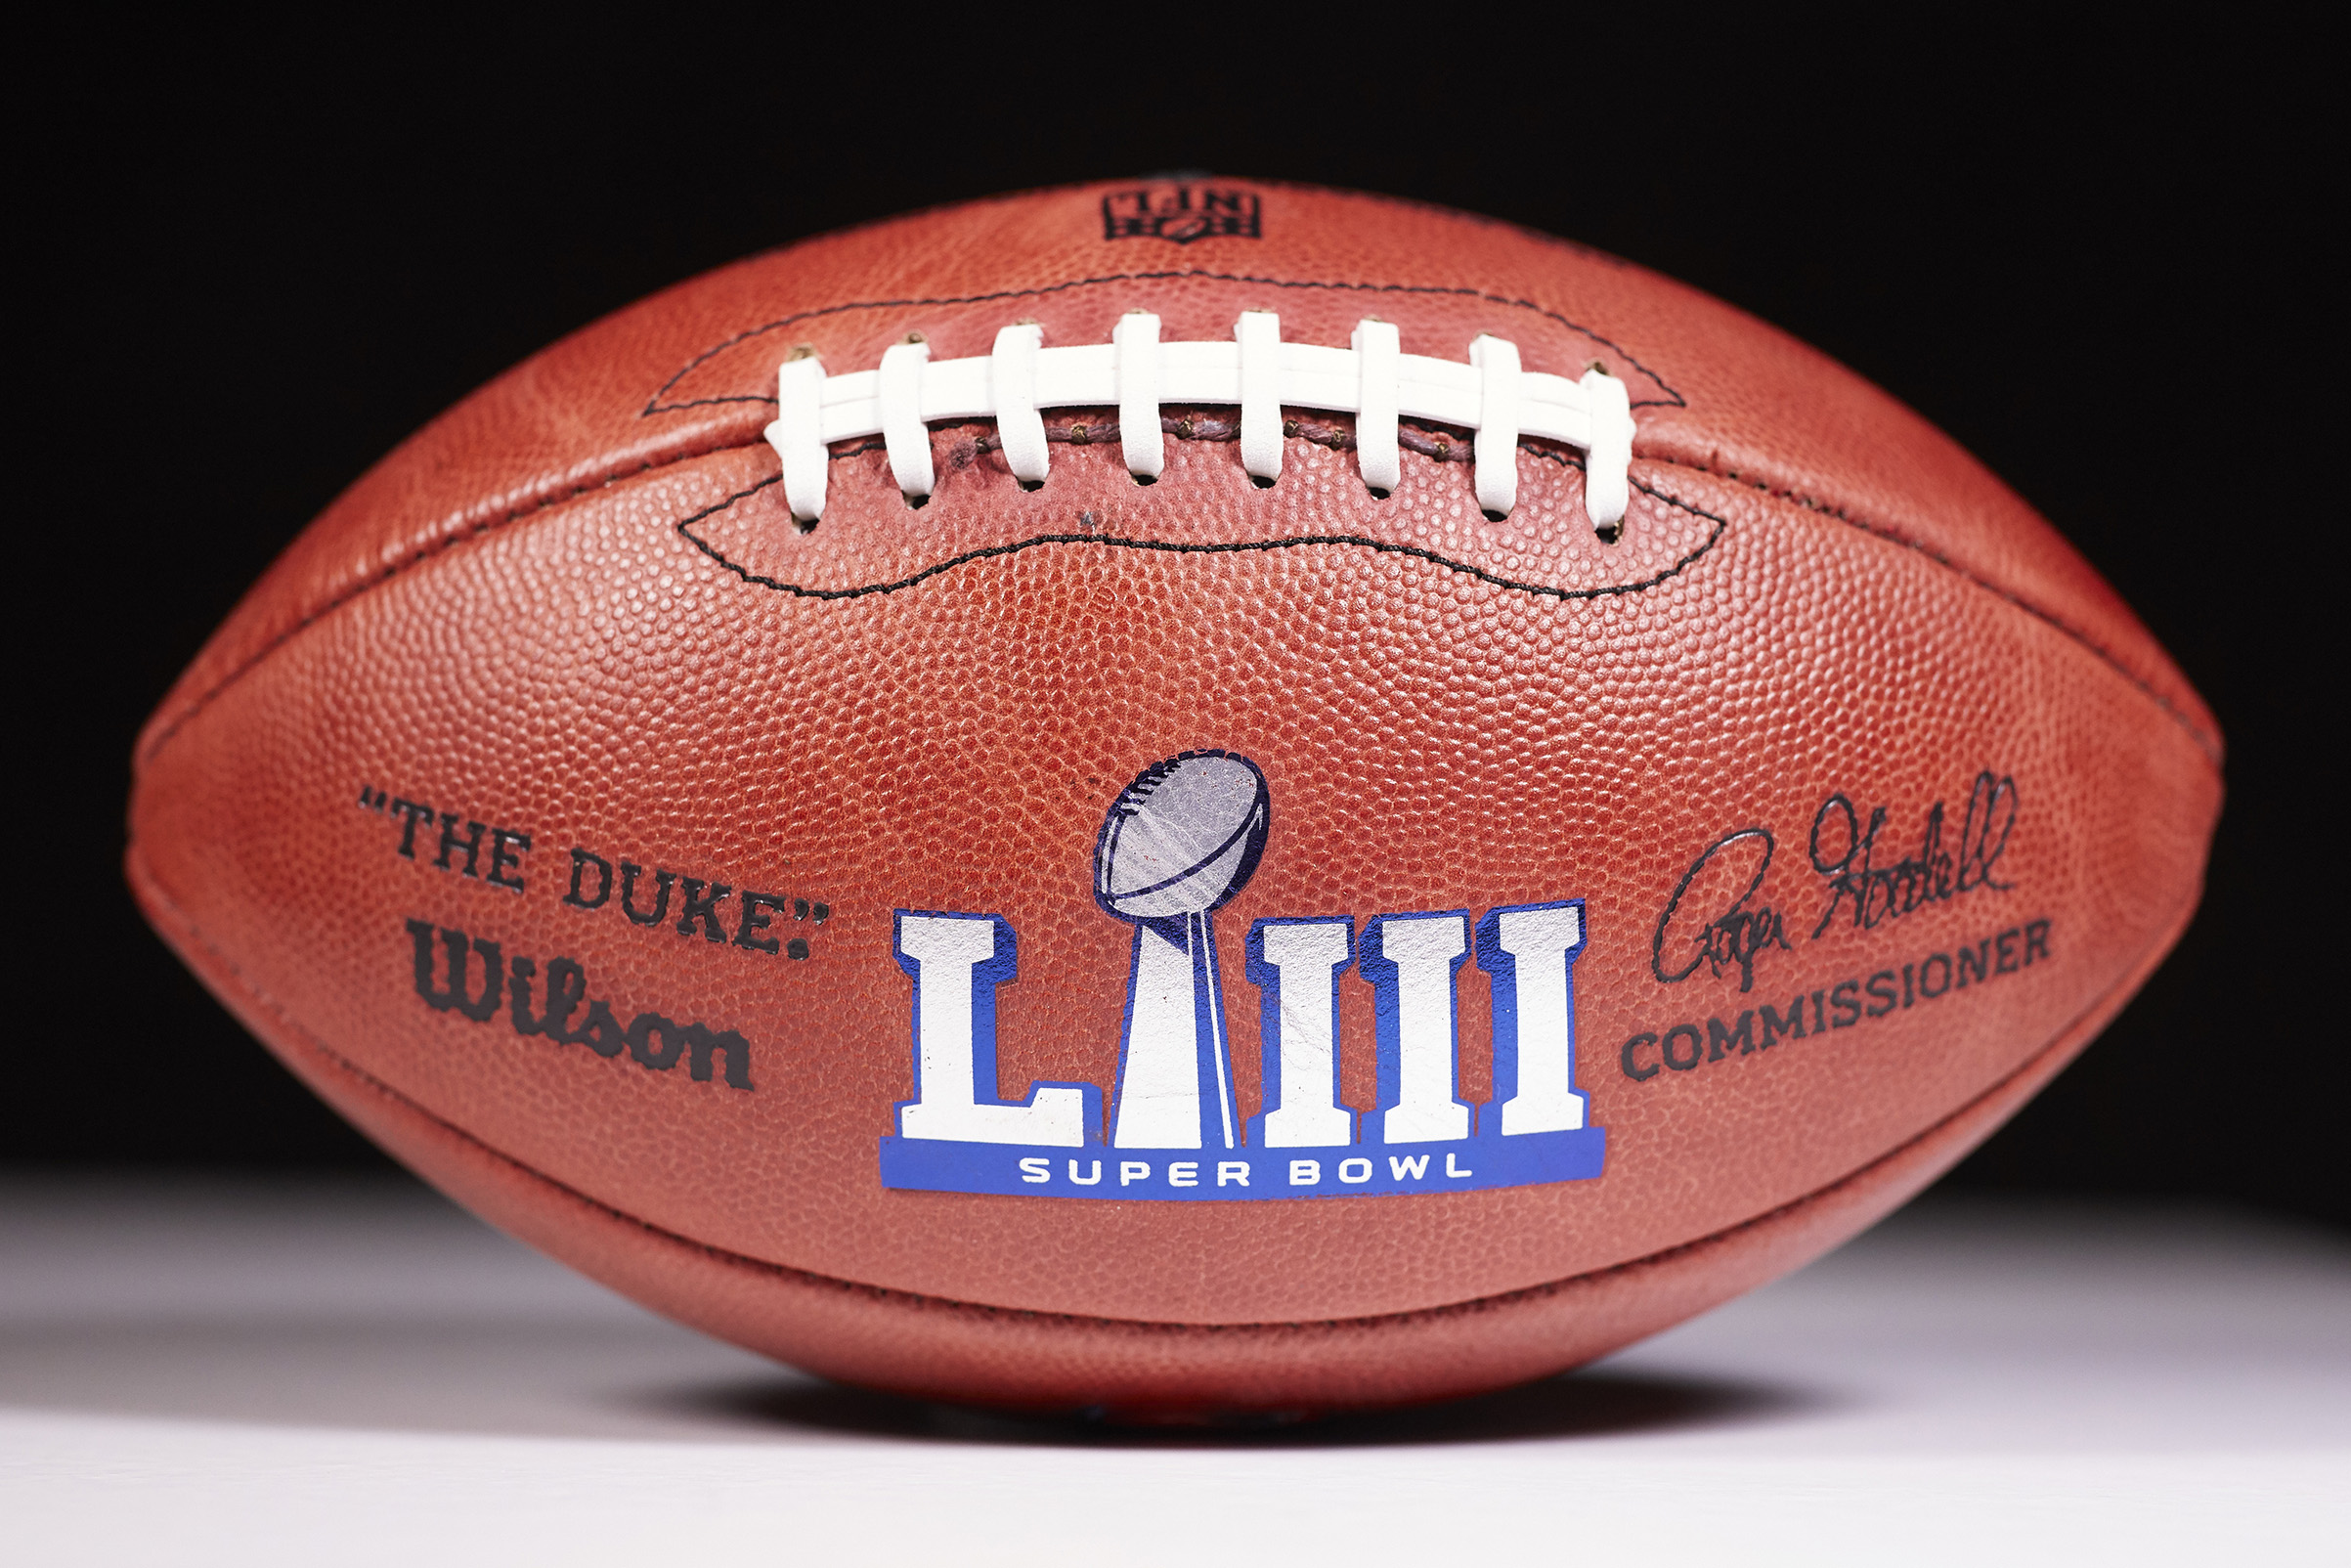 Nfl Football Ball Size : Wilson NFL Football | Official Size WTF1793